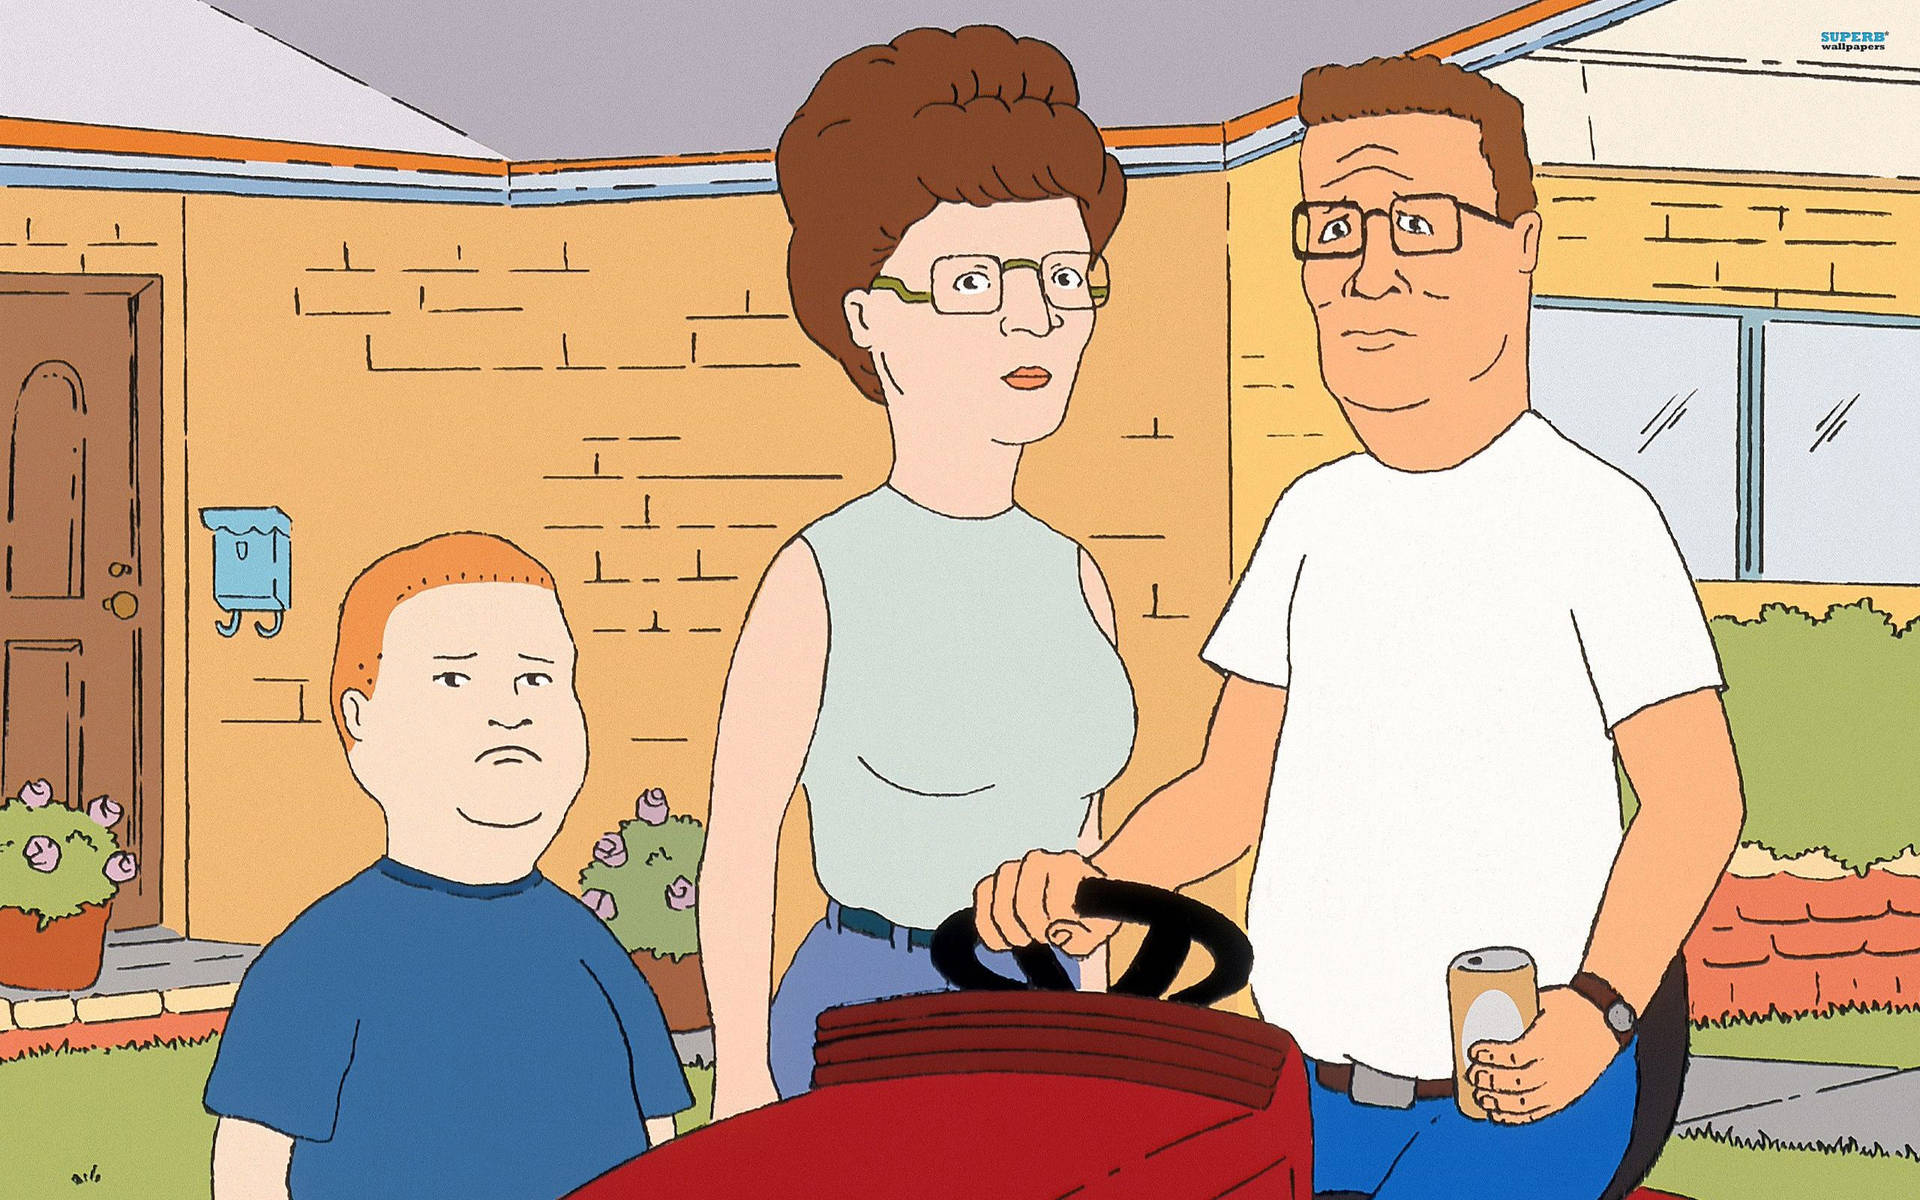 Bobbyhill Och Hank Och Peggy. (there Is No Specific Context Given, But This Can Simply Be The Text For A Computer Or Mobile Wallpaper Featuring These Characters From The Tv Show King Of The Hill.) Wallpaper